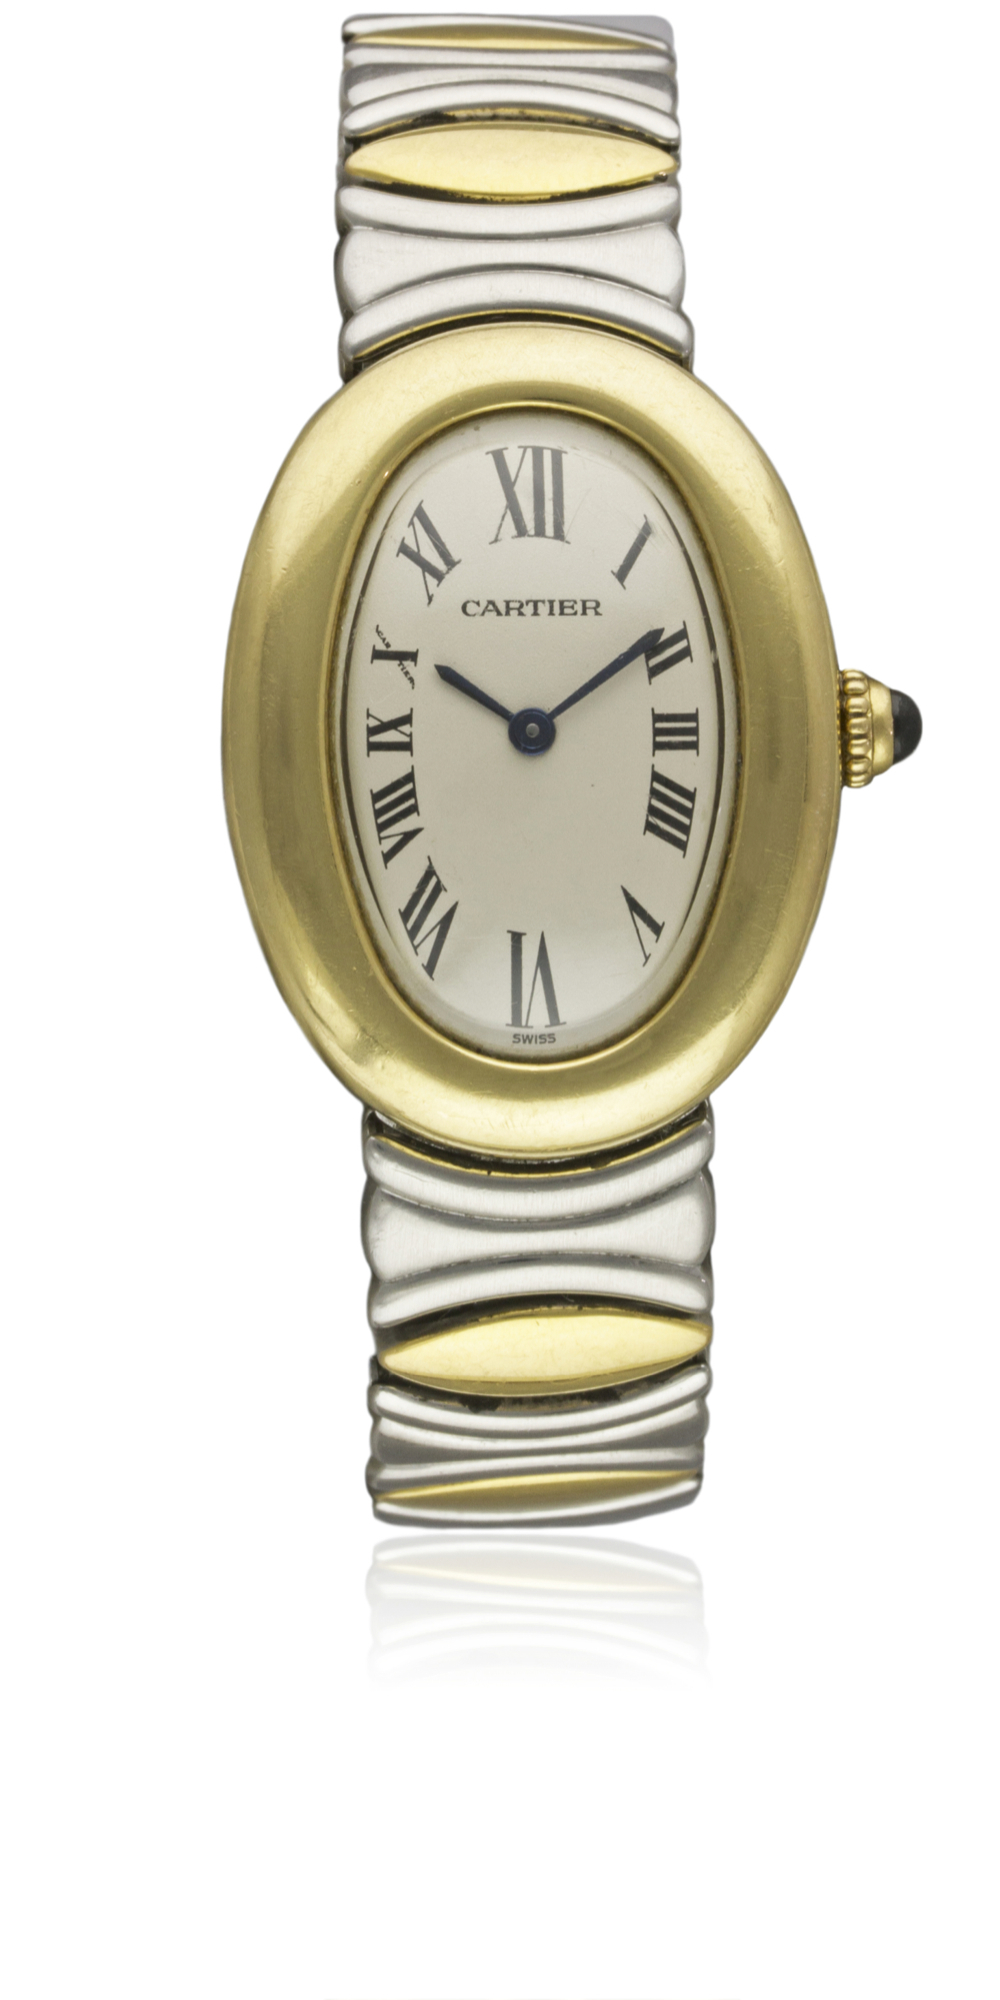 A LADIES 18K SOLID GOLD & STAINLESS STEEL CARTIER BAIGNOIRE BRACELET WATCH CIRCA 1990s, REF. 8057910 - Image 2 of 2